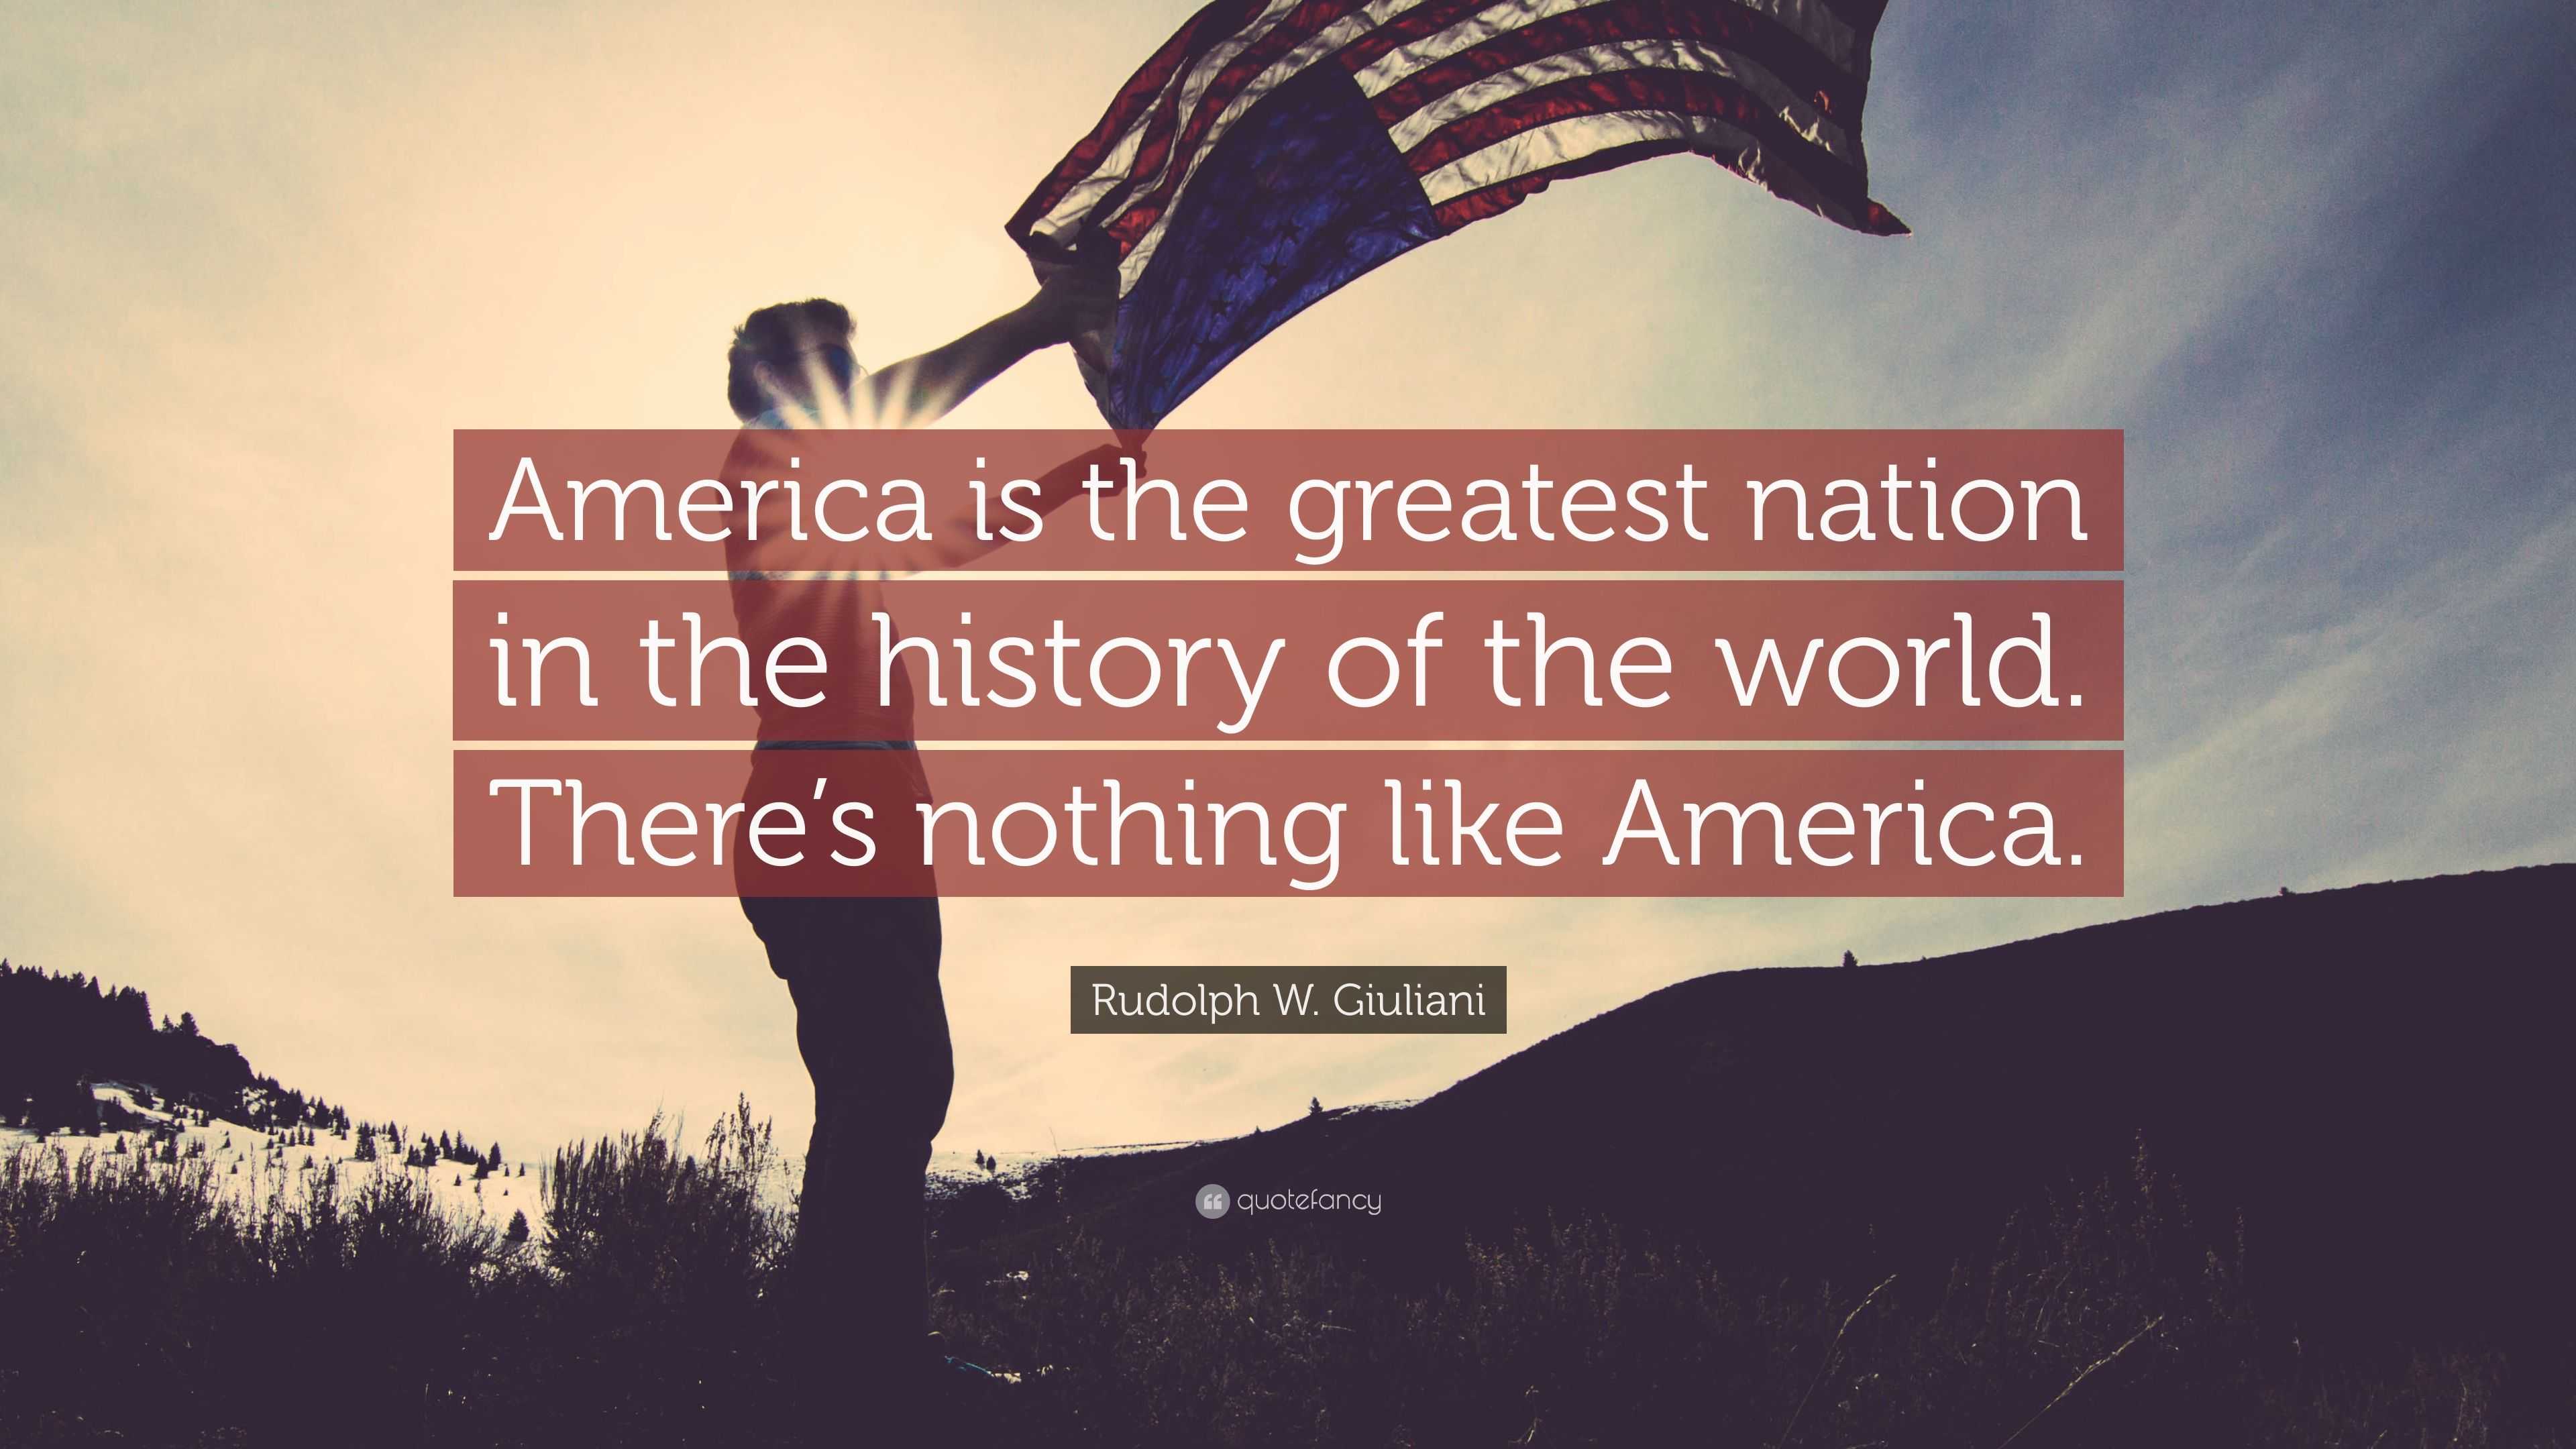 America, the Greatest Nation in the History of the World